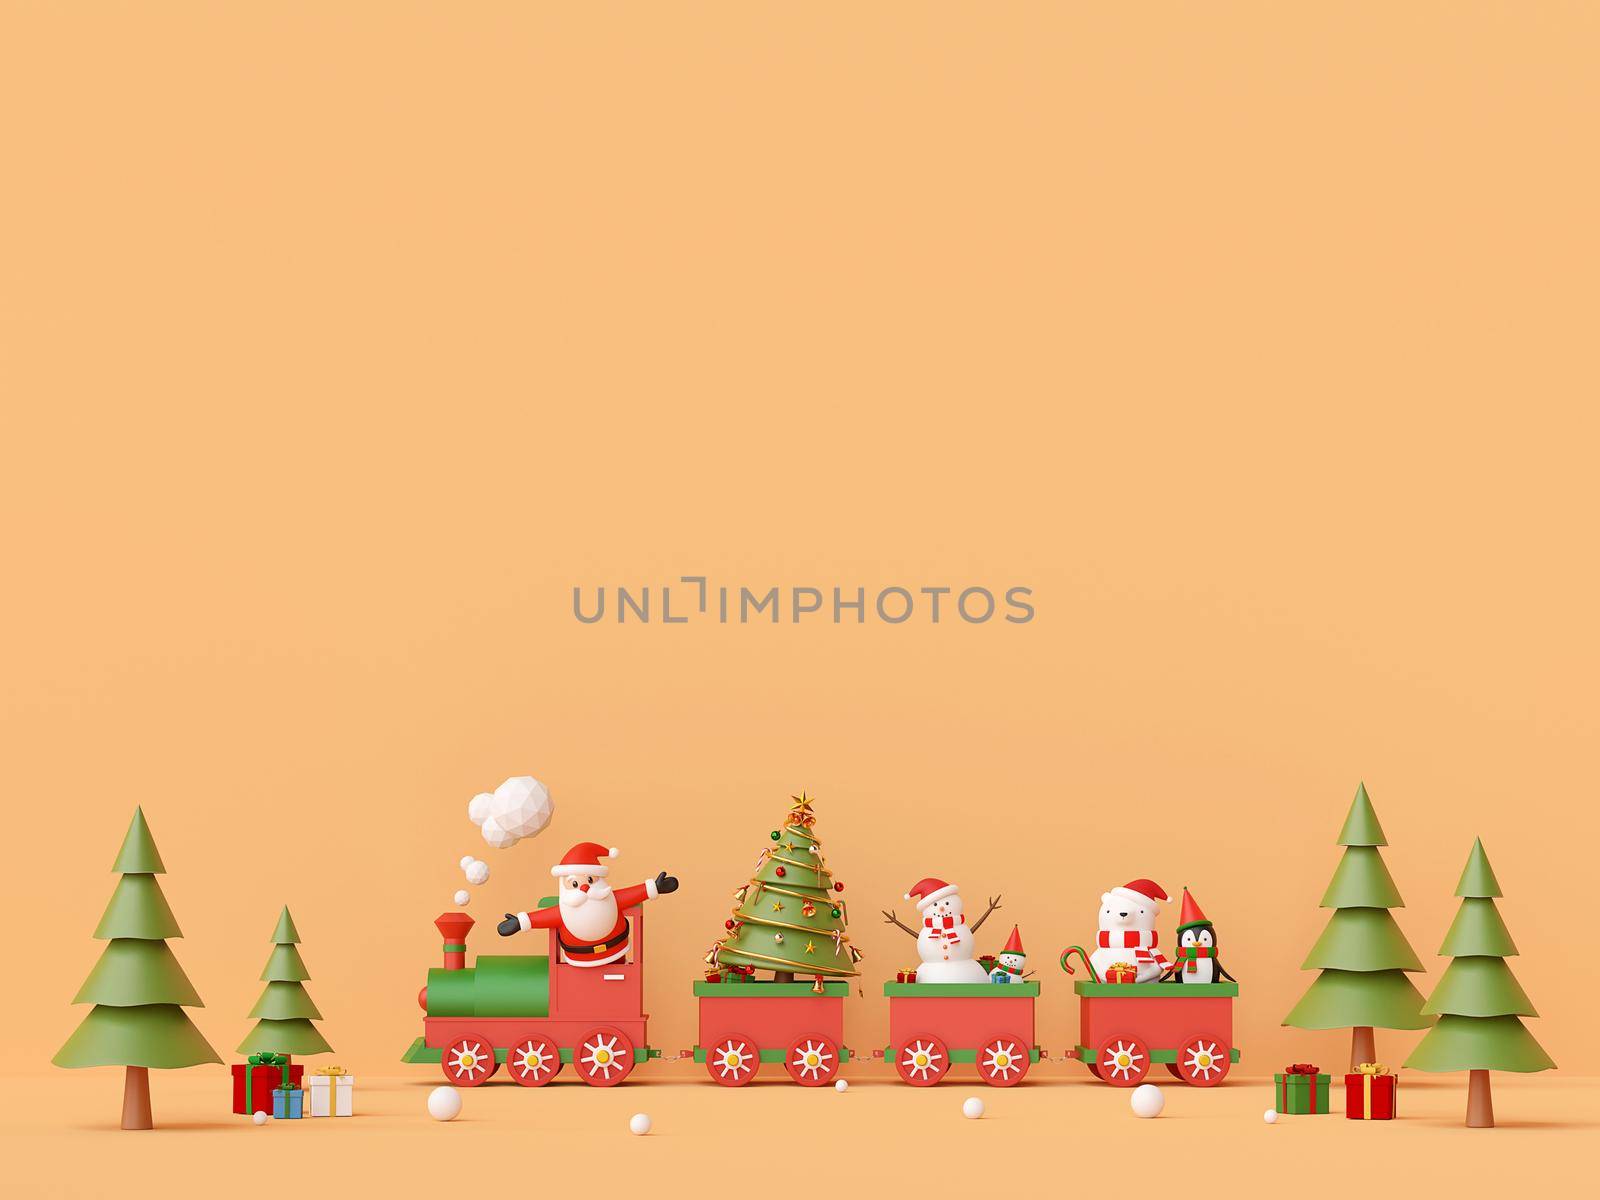 Merry Christmas and Happy New Year, Santa Claus and Snowman on Christmas train with gifts with copy space, 3d rendering